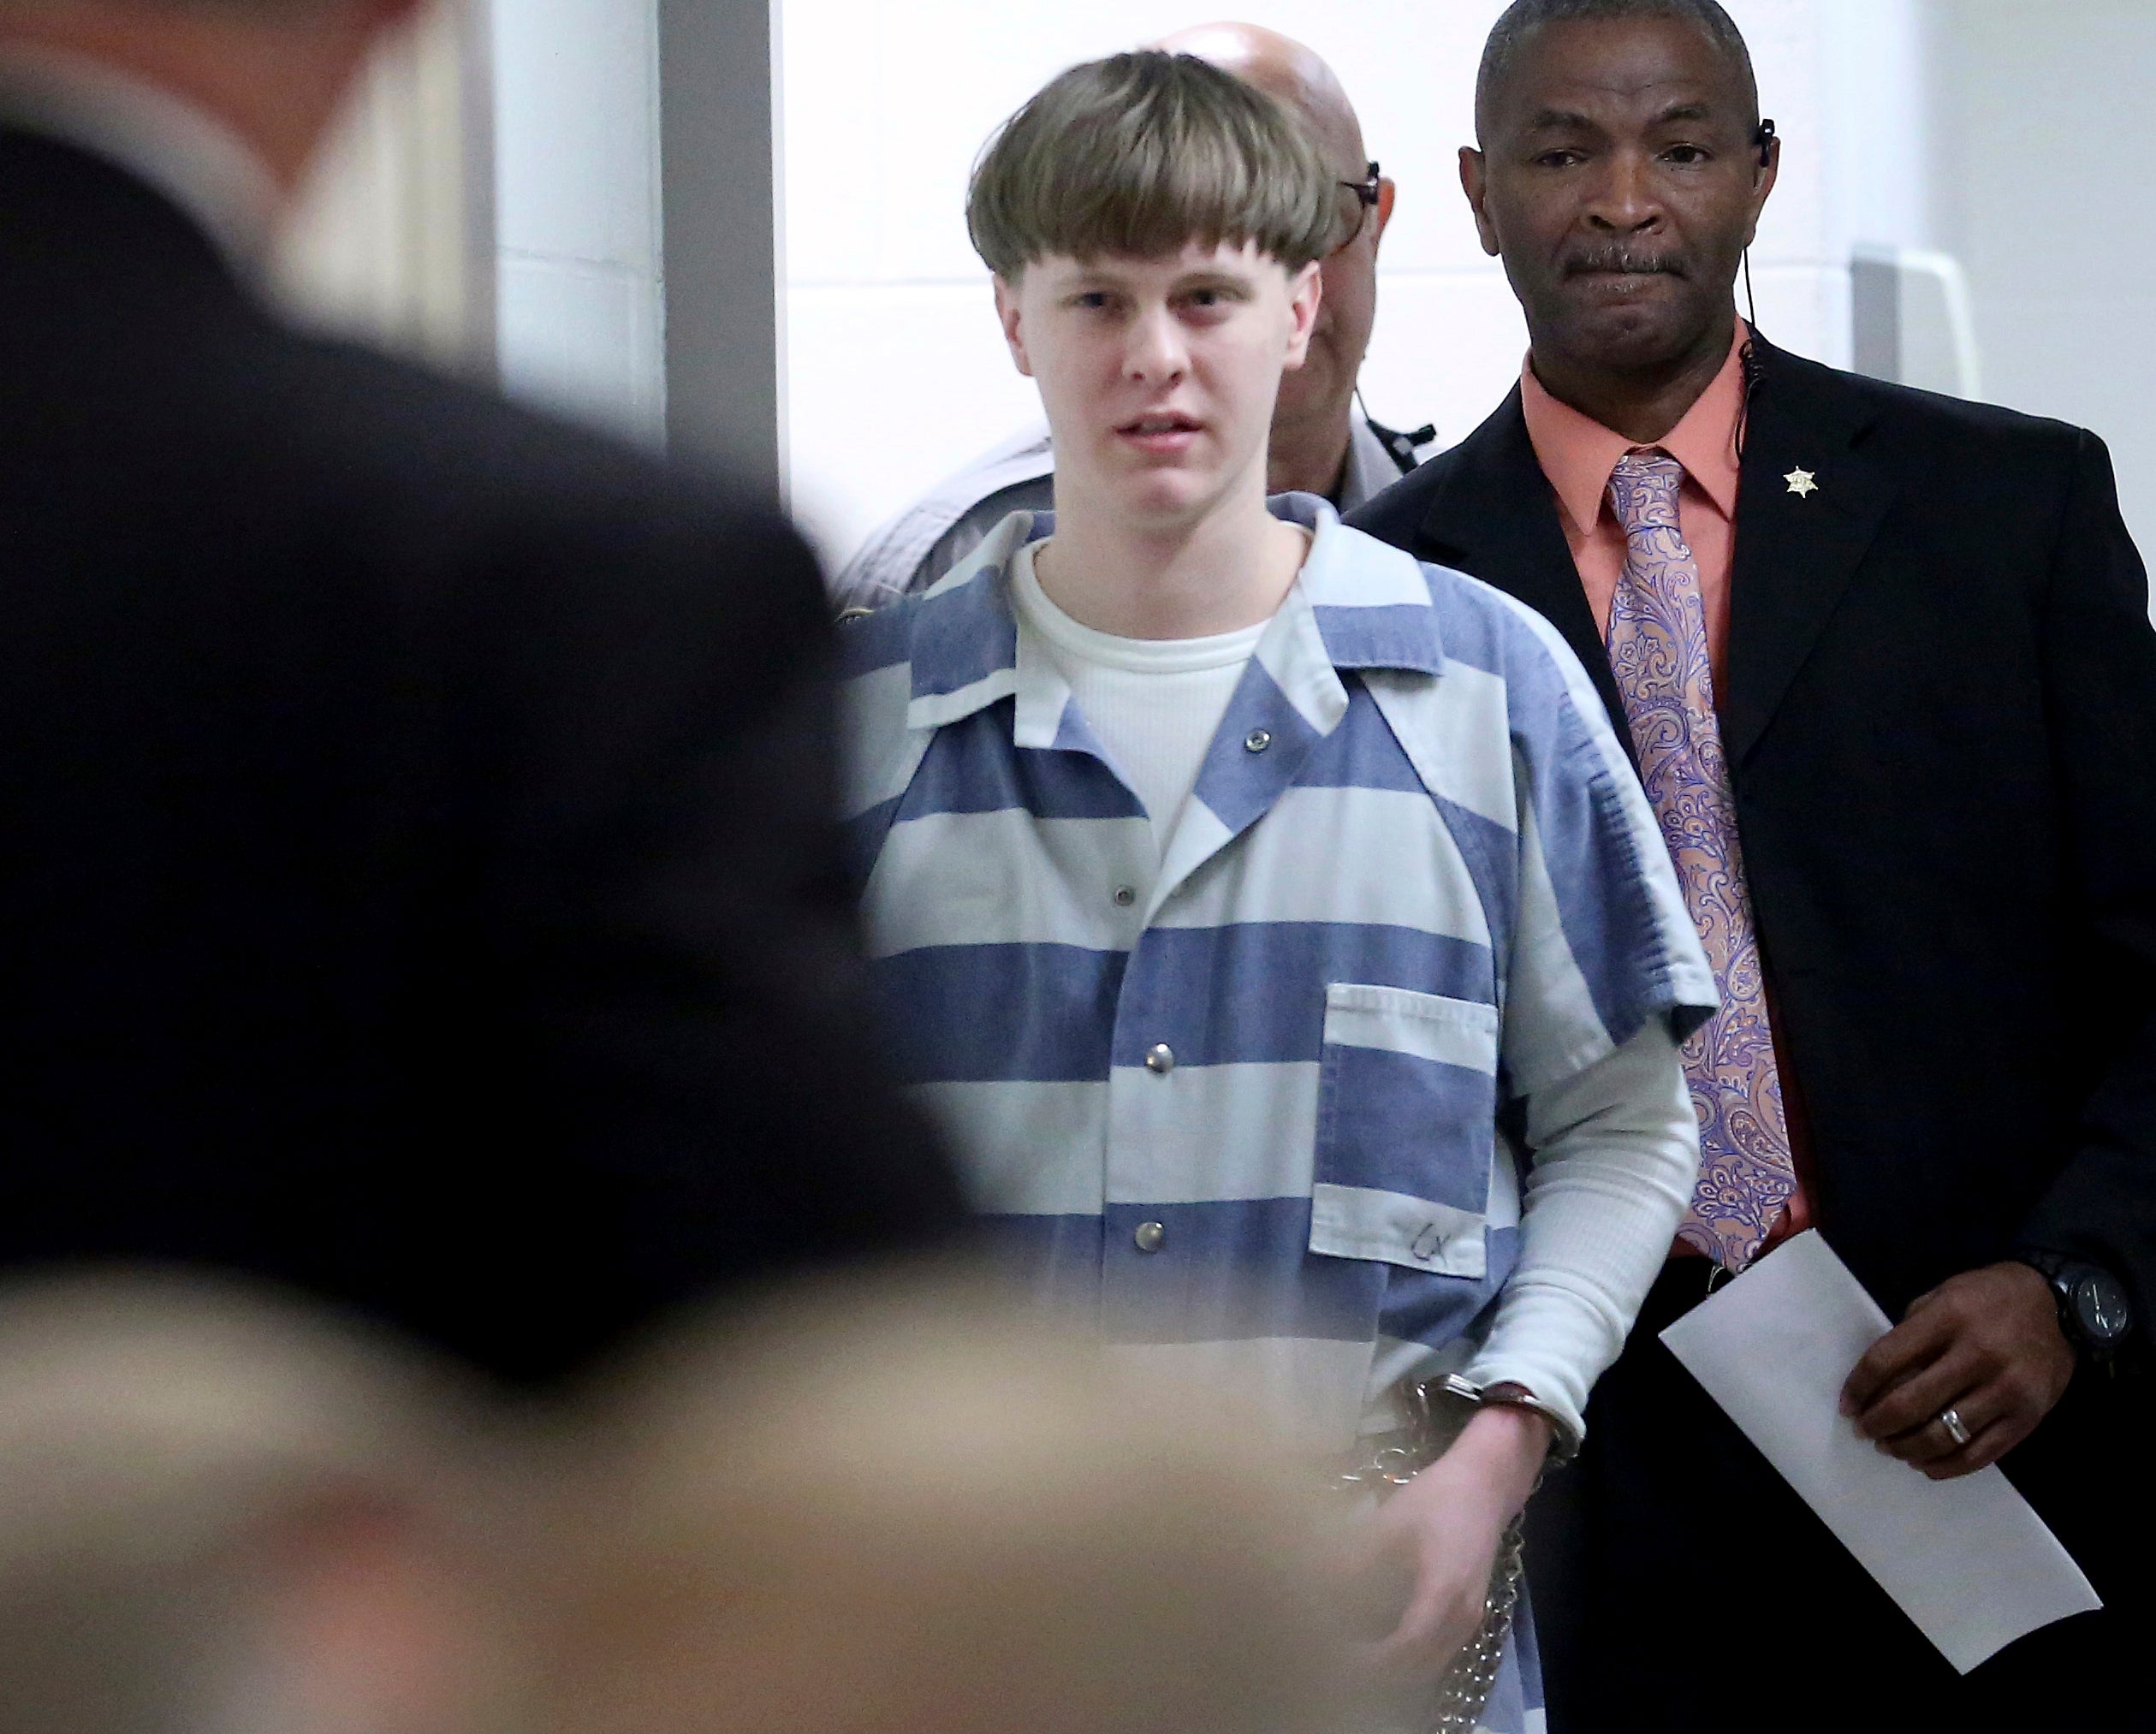 Federal prosecutors are seeking the death penalty for Charleston church shooter Dylann Roof